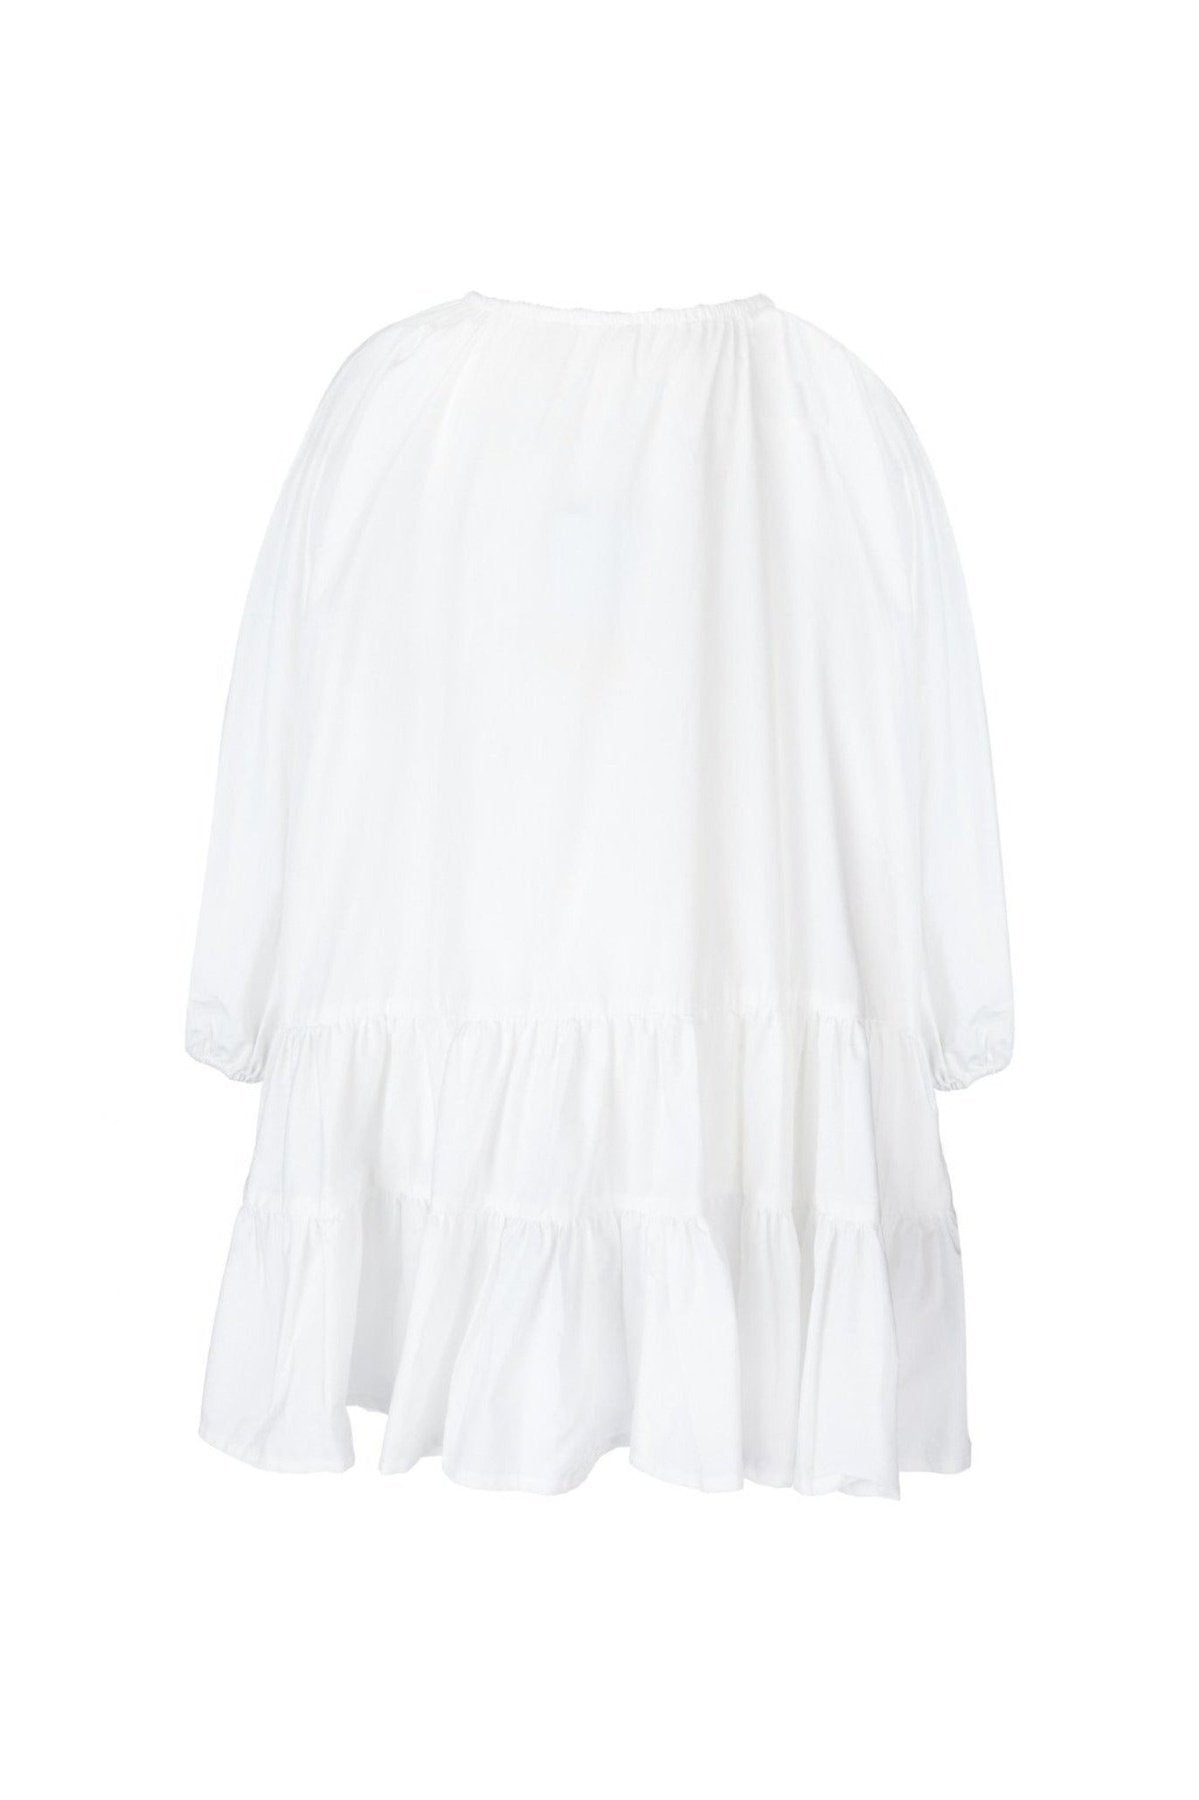 M'A KIDS STAND COLLAR WITH GATHERS DRESS IN WHITE